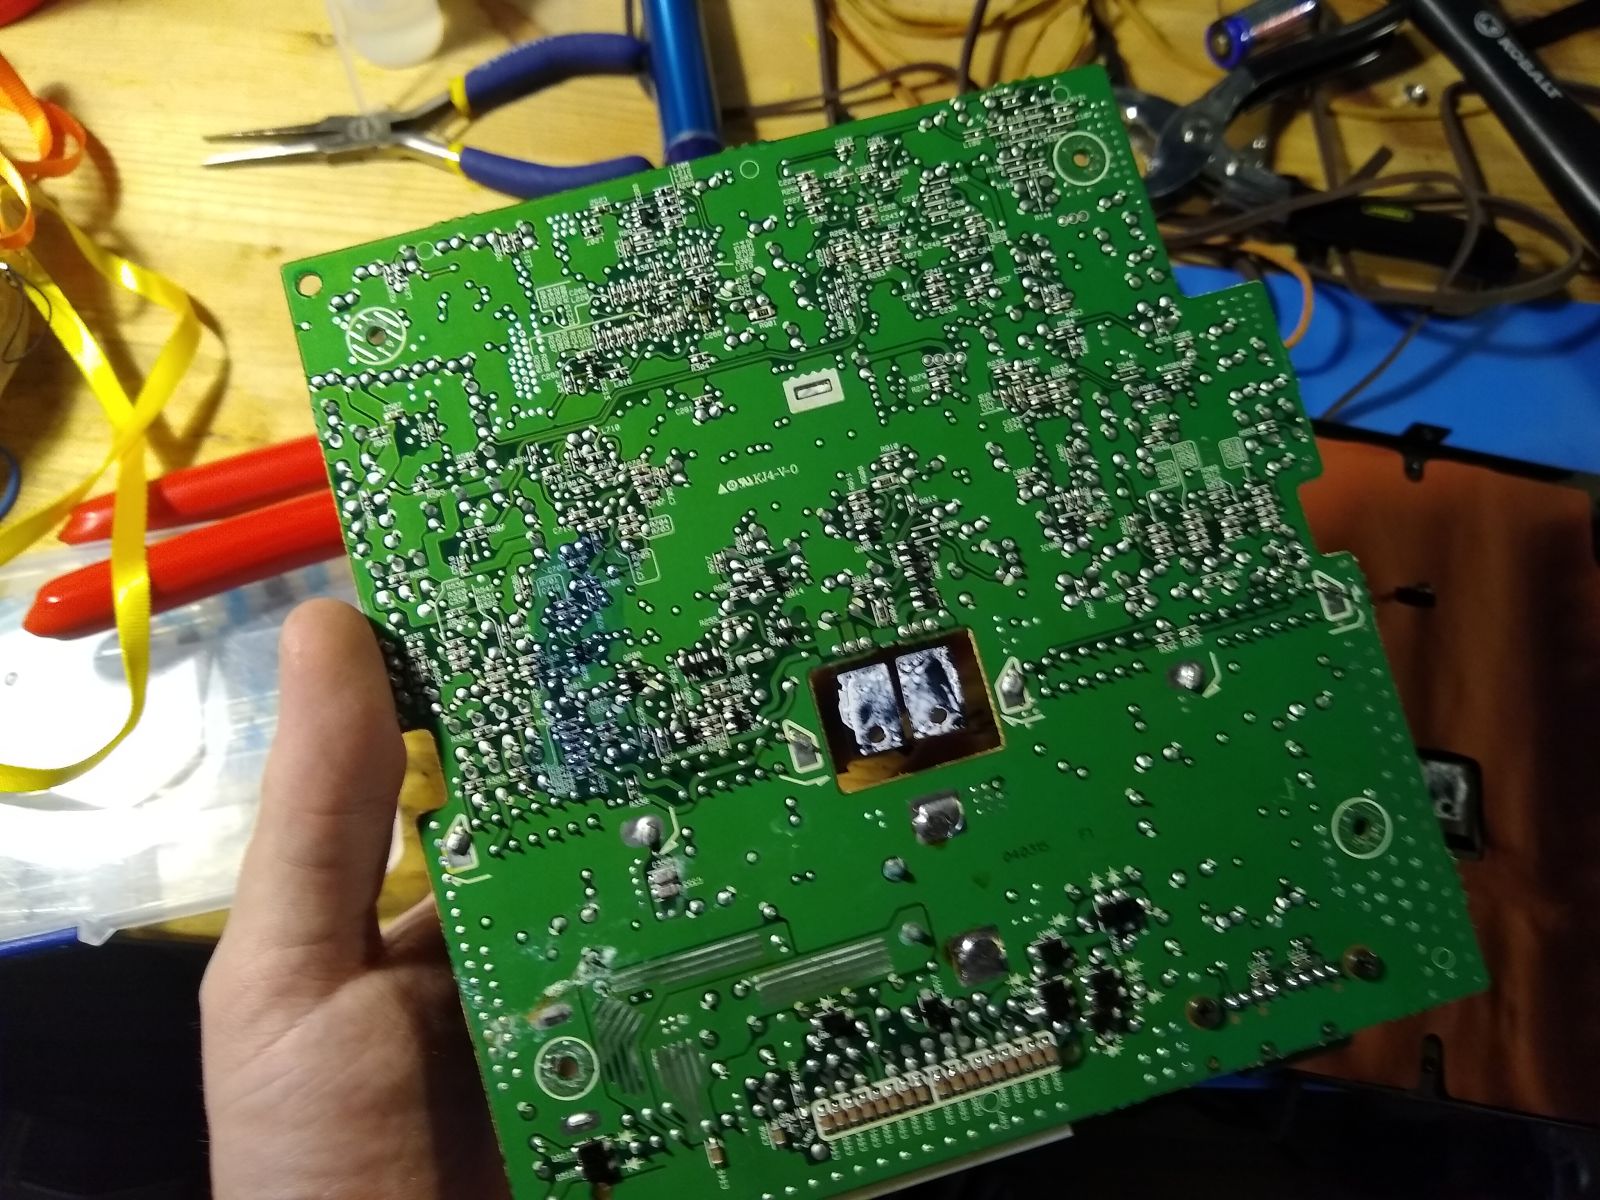 The blue is some form of conformal coating and looks semi-intentional. I did not remove it.